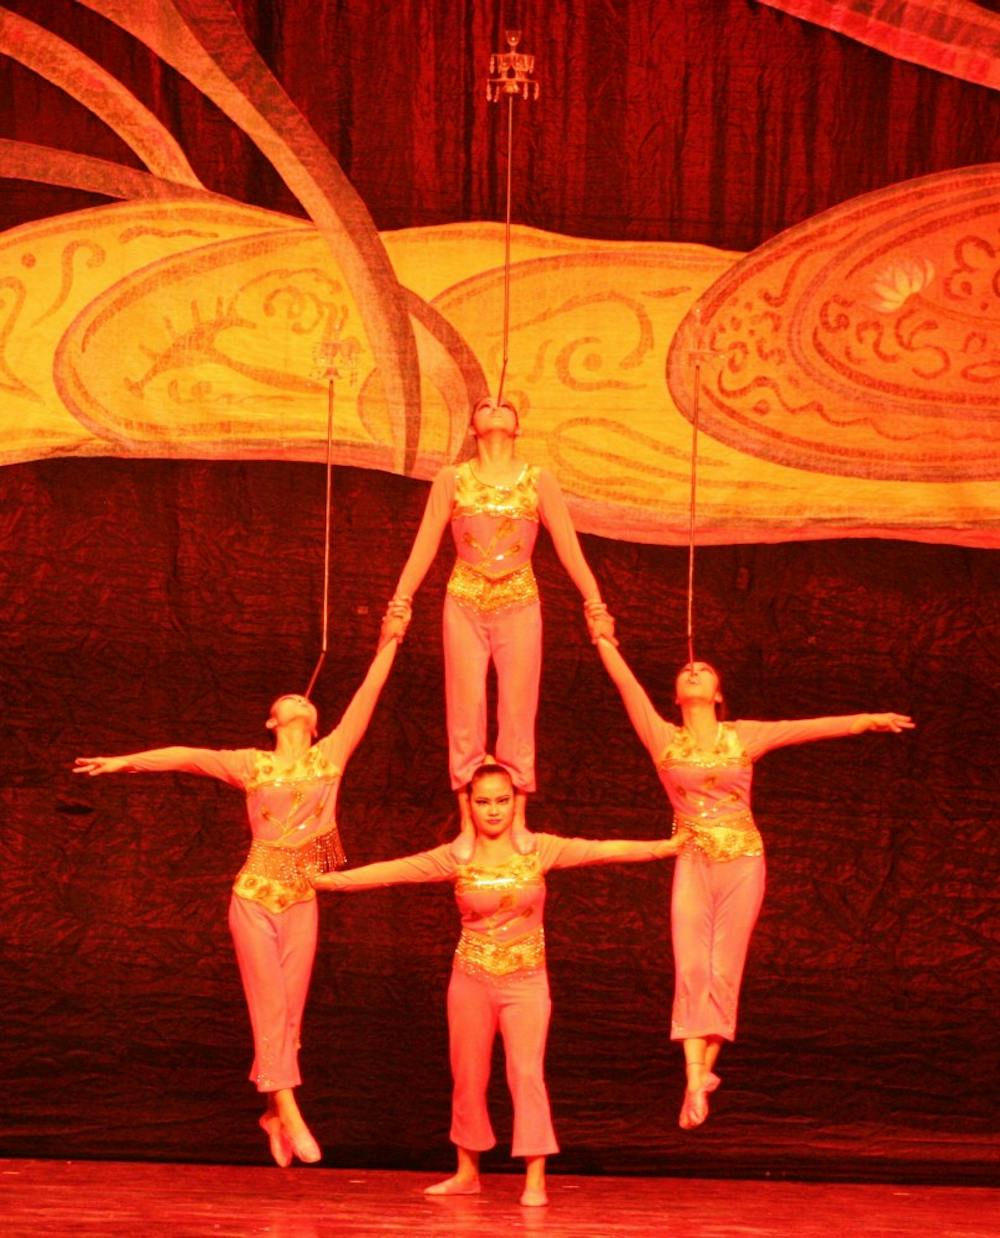 The Golden Dragon Acrobats performed the show Cirque Ziva on February 19 at Emens Auditorium. DN PHOTO EMILY CUNNINGHAM